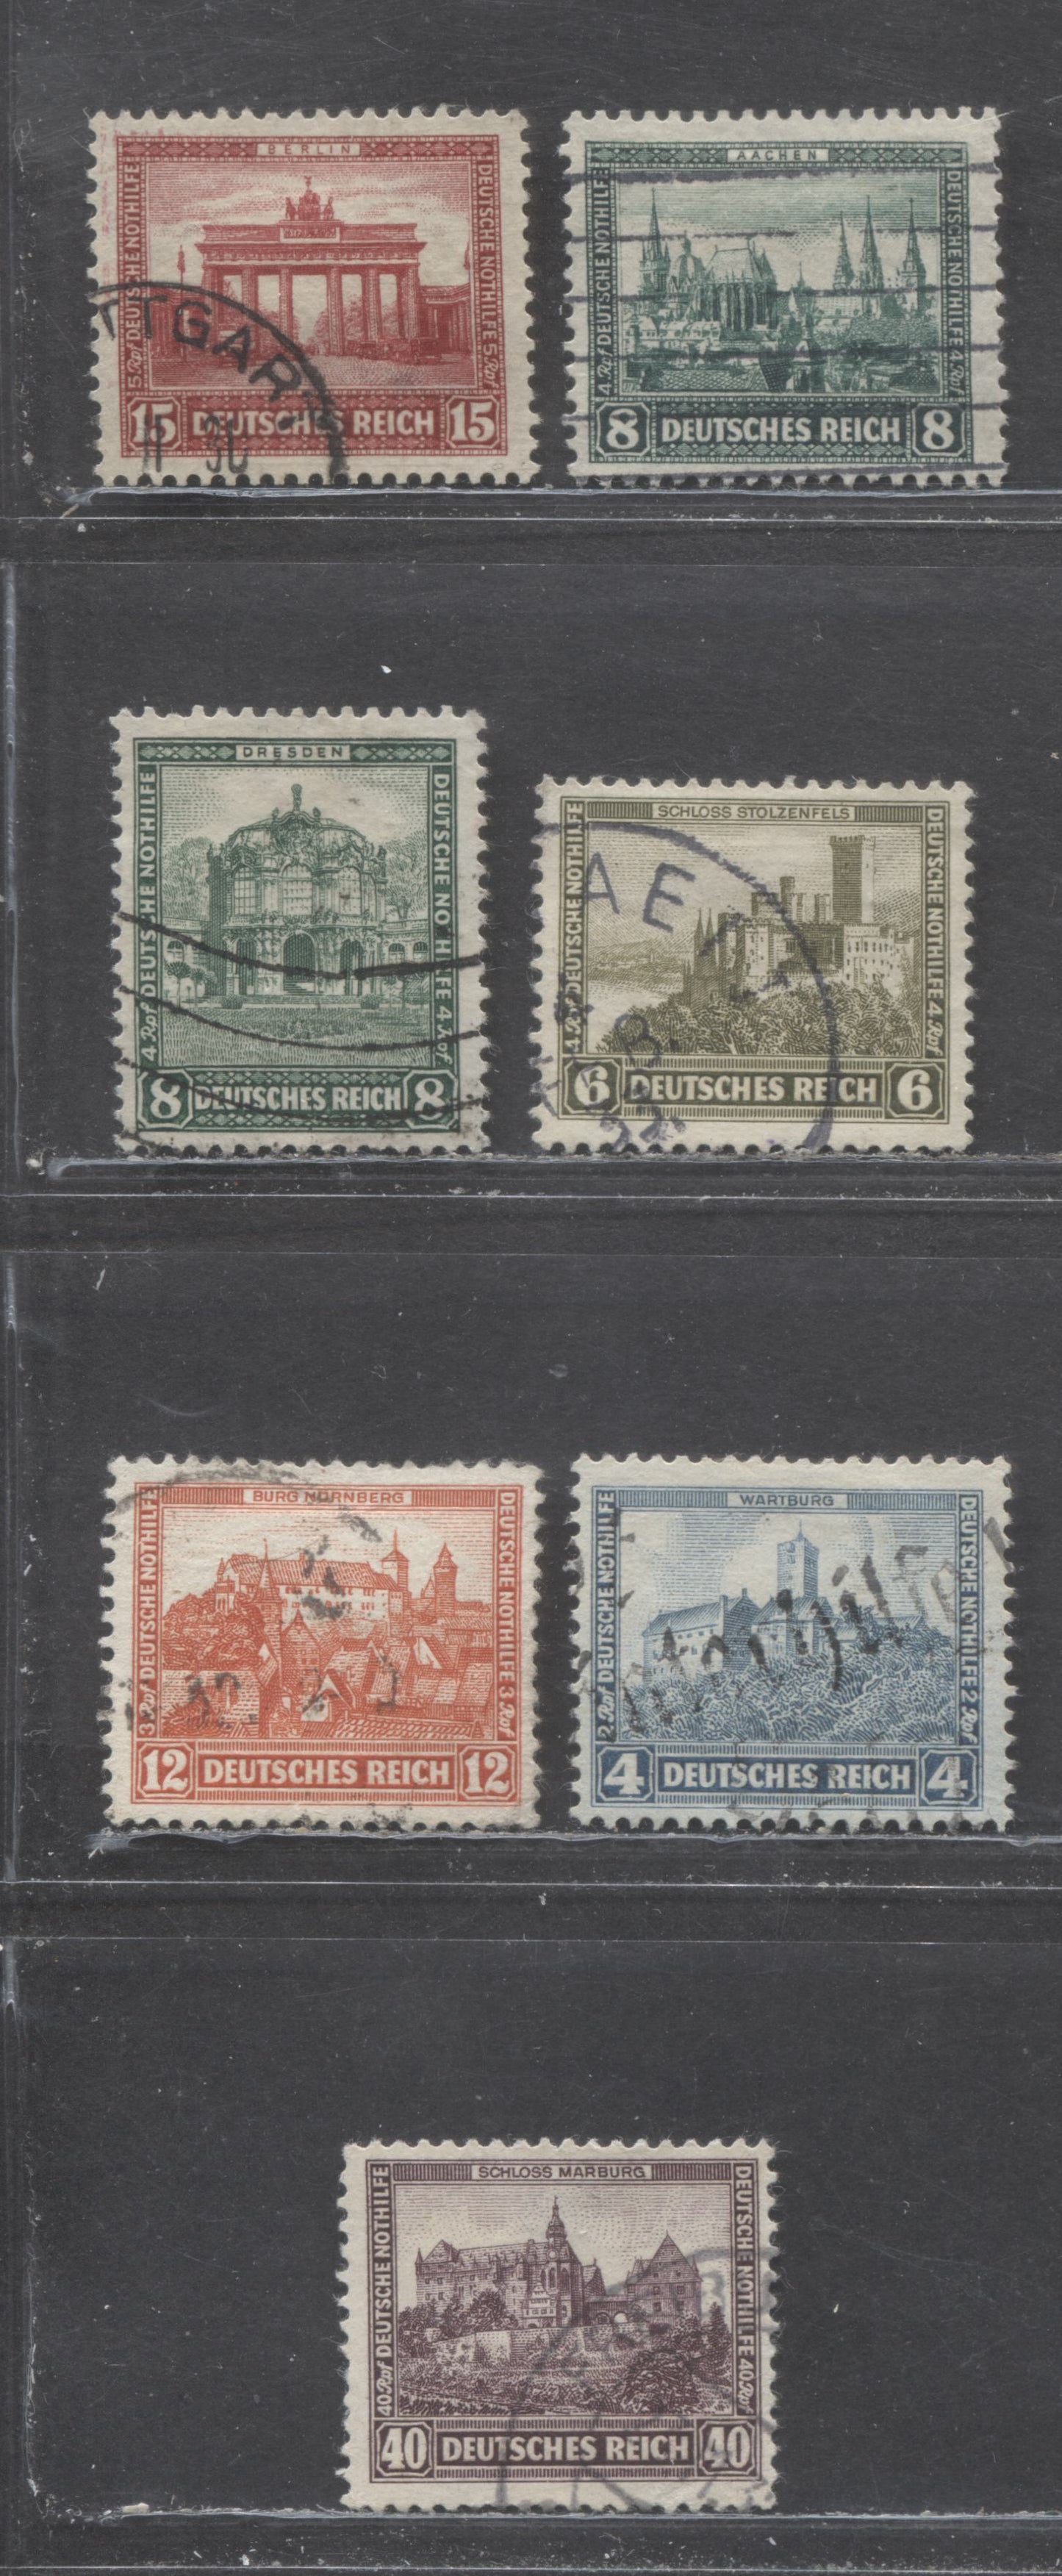 Lot 73 Germany SC#B34/B48 1930-1932 Semi Postals, 7 Fine/Very Fine Used Singles, Click on Listing to See ALL Pictures, Estimated Value $35